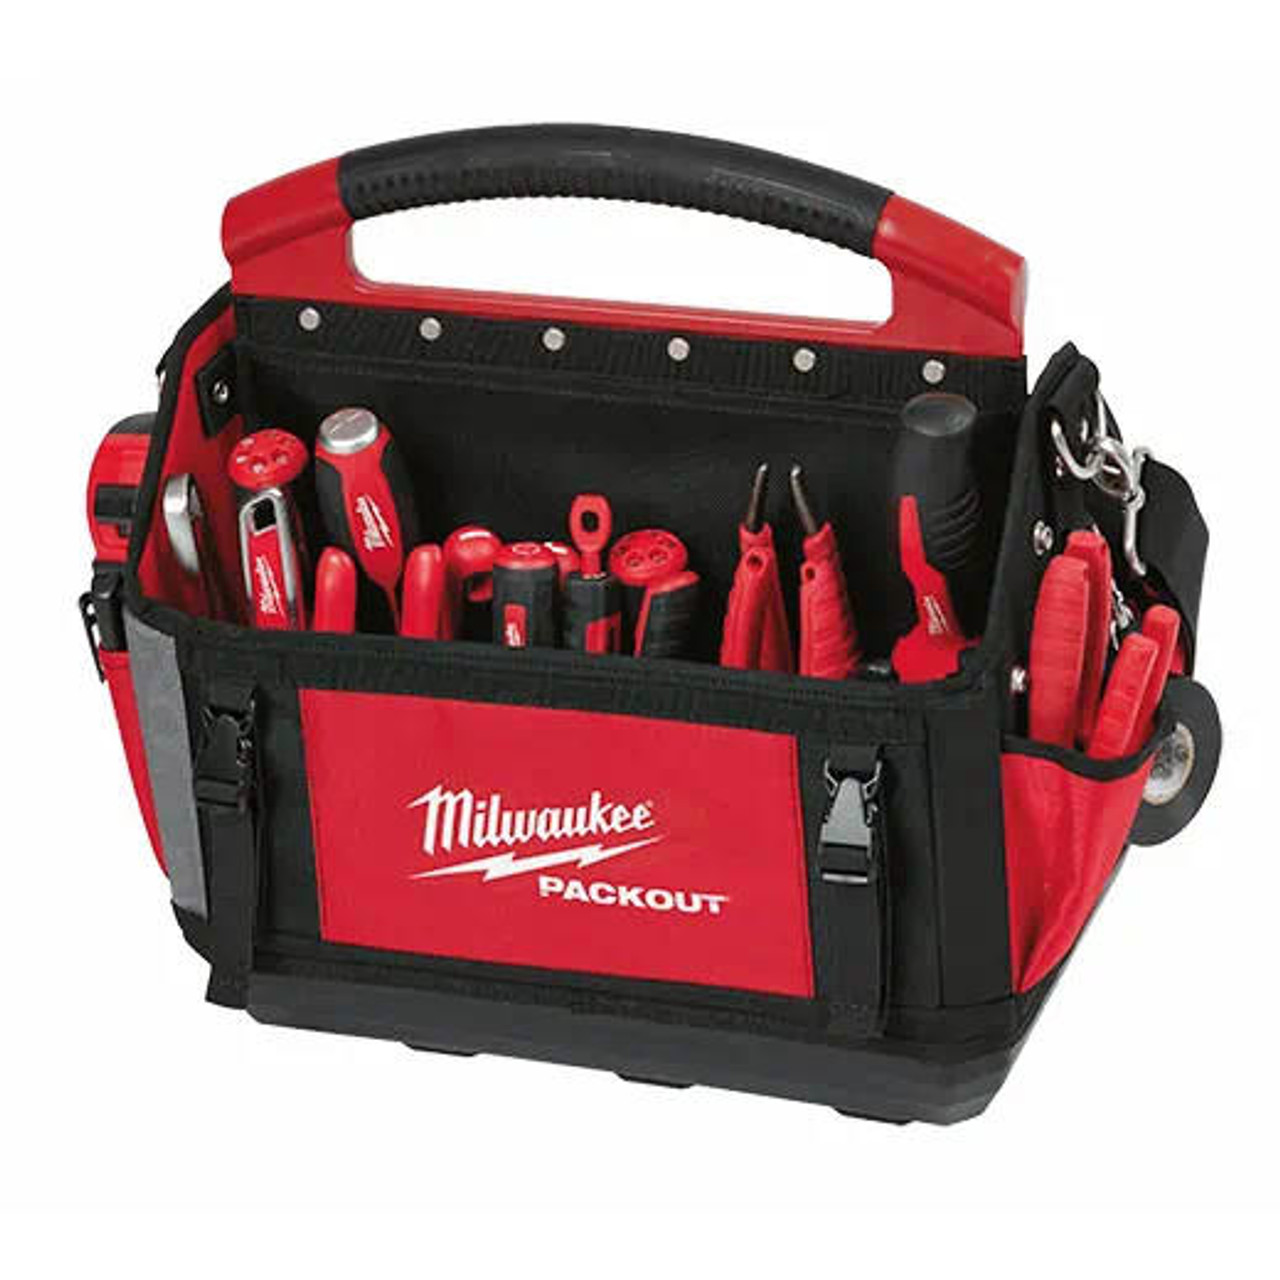  Milwaukee PACKOUT 15" Tote 48-22-8315 